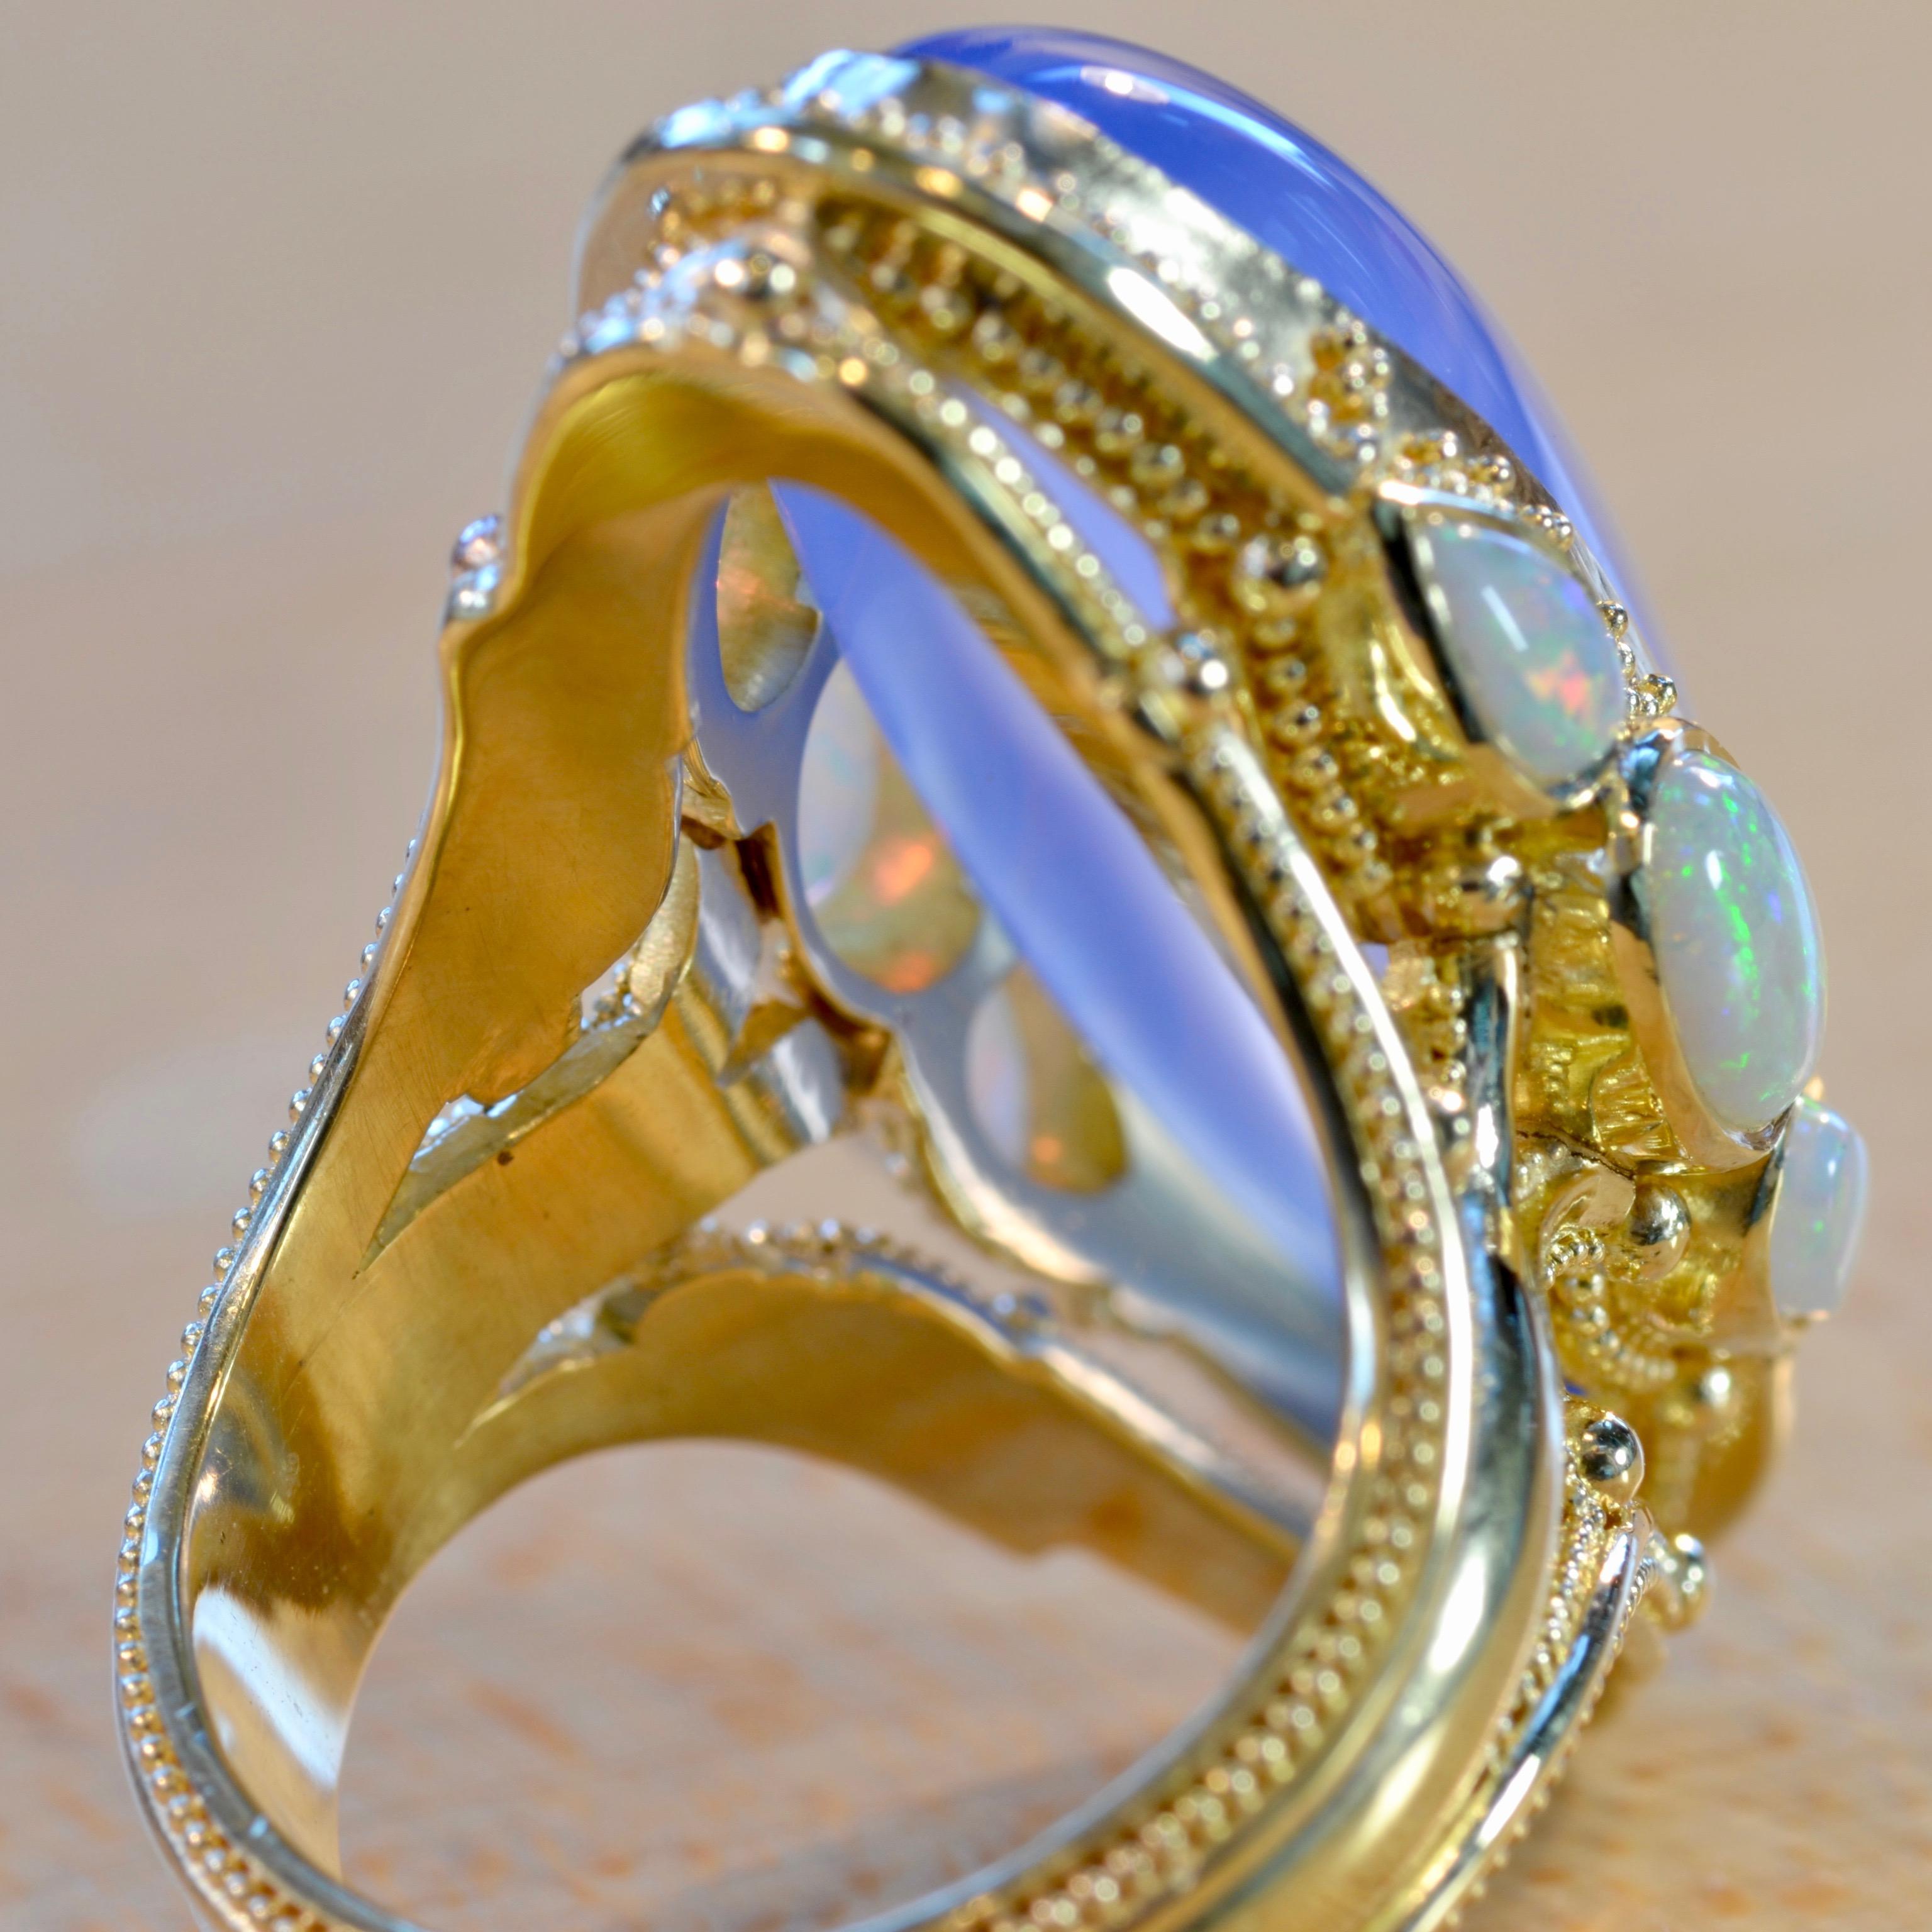 Kent Raible 18 Karat Gold Chalcedony and Opal Cocktail Ring with Granulation 2